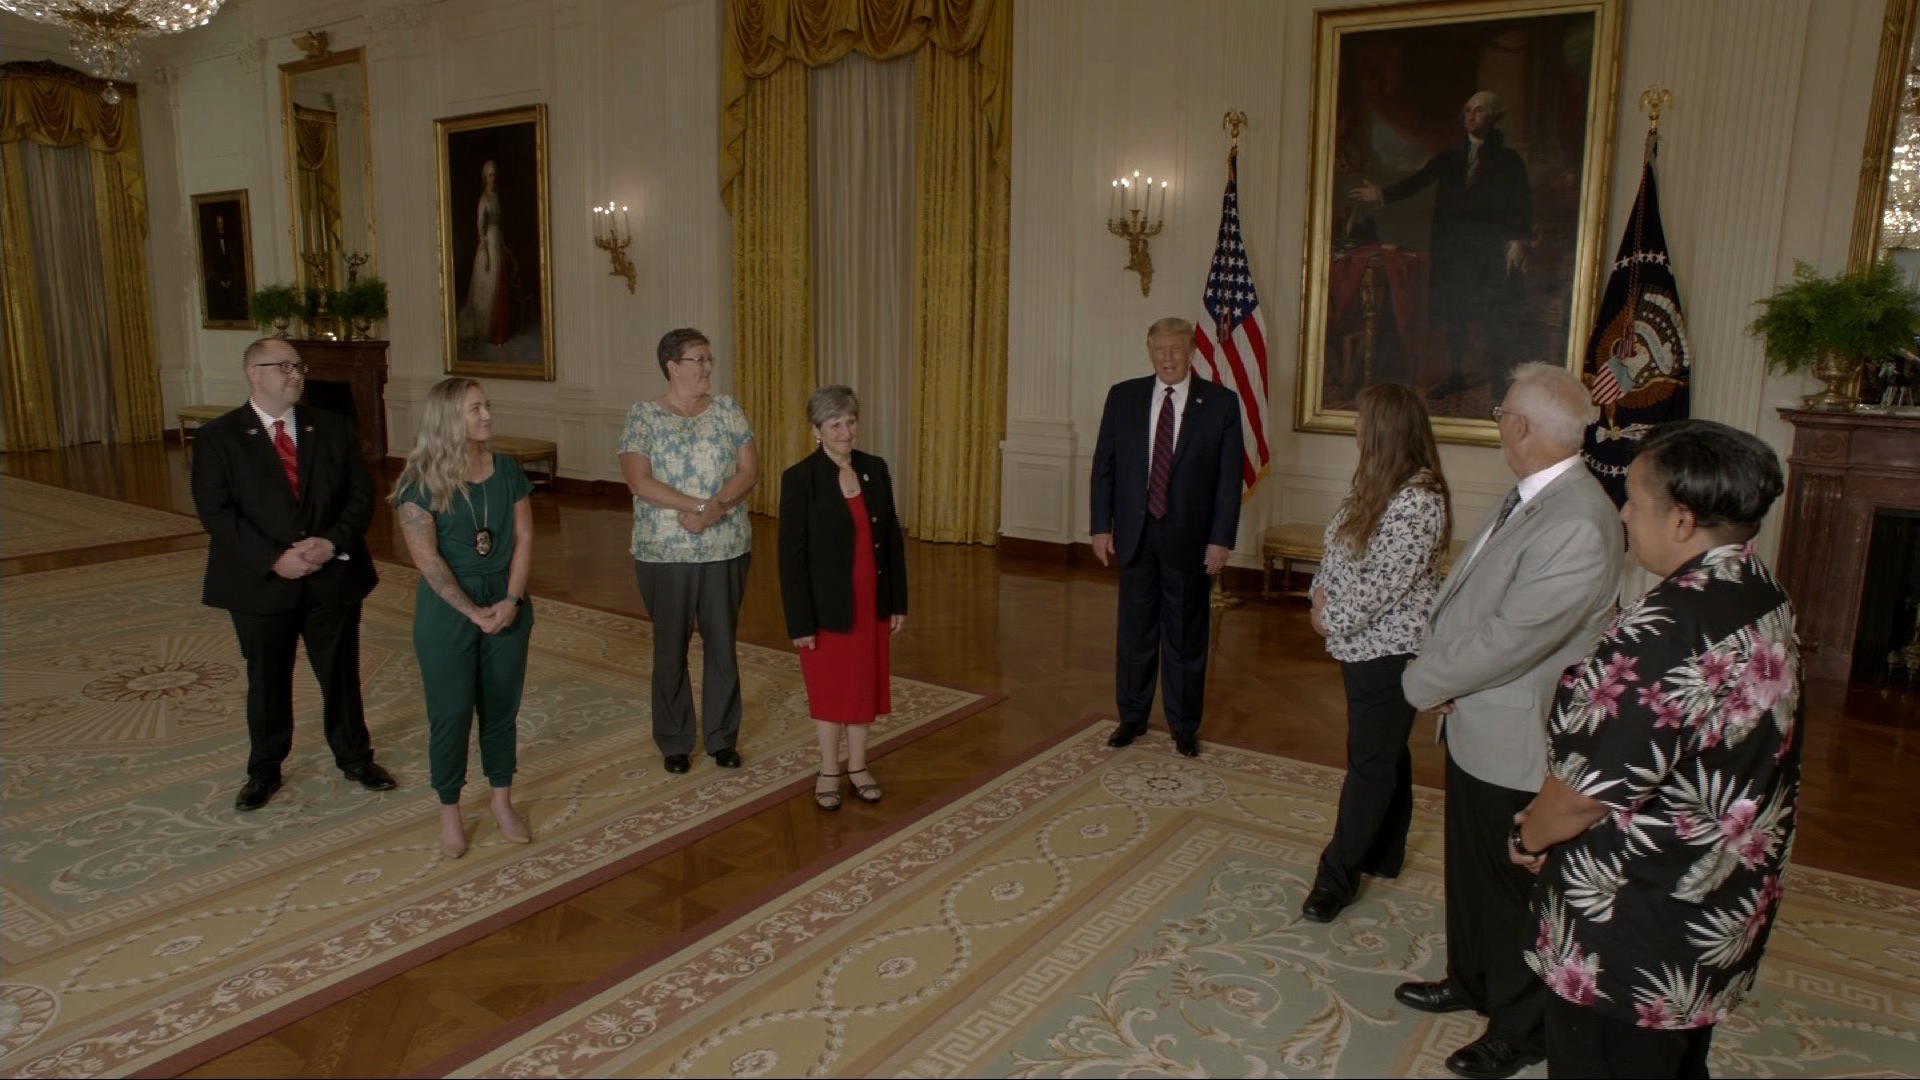 President Trump speaks to frontline workers in the White House in Washington.